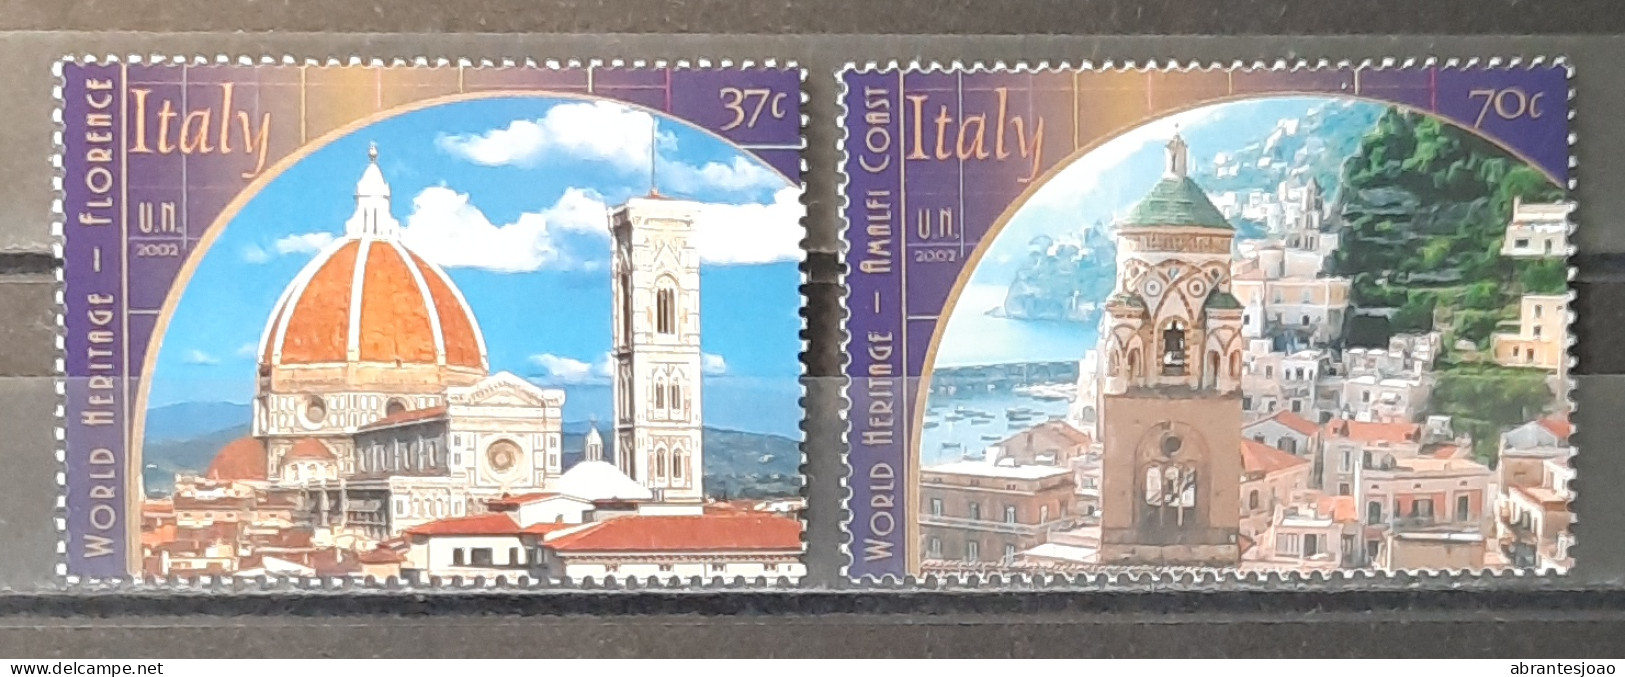 2002 - United Nations New York - MNH - Italy World Heritage - 2 Stamps - Unused Stamps